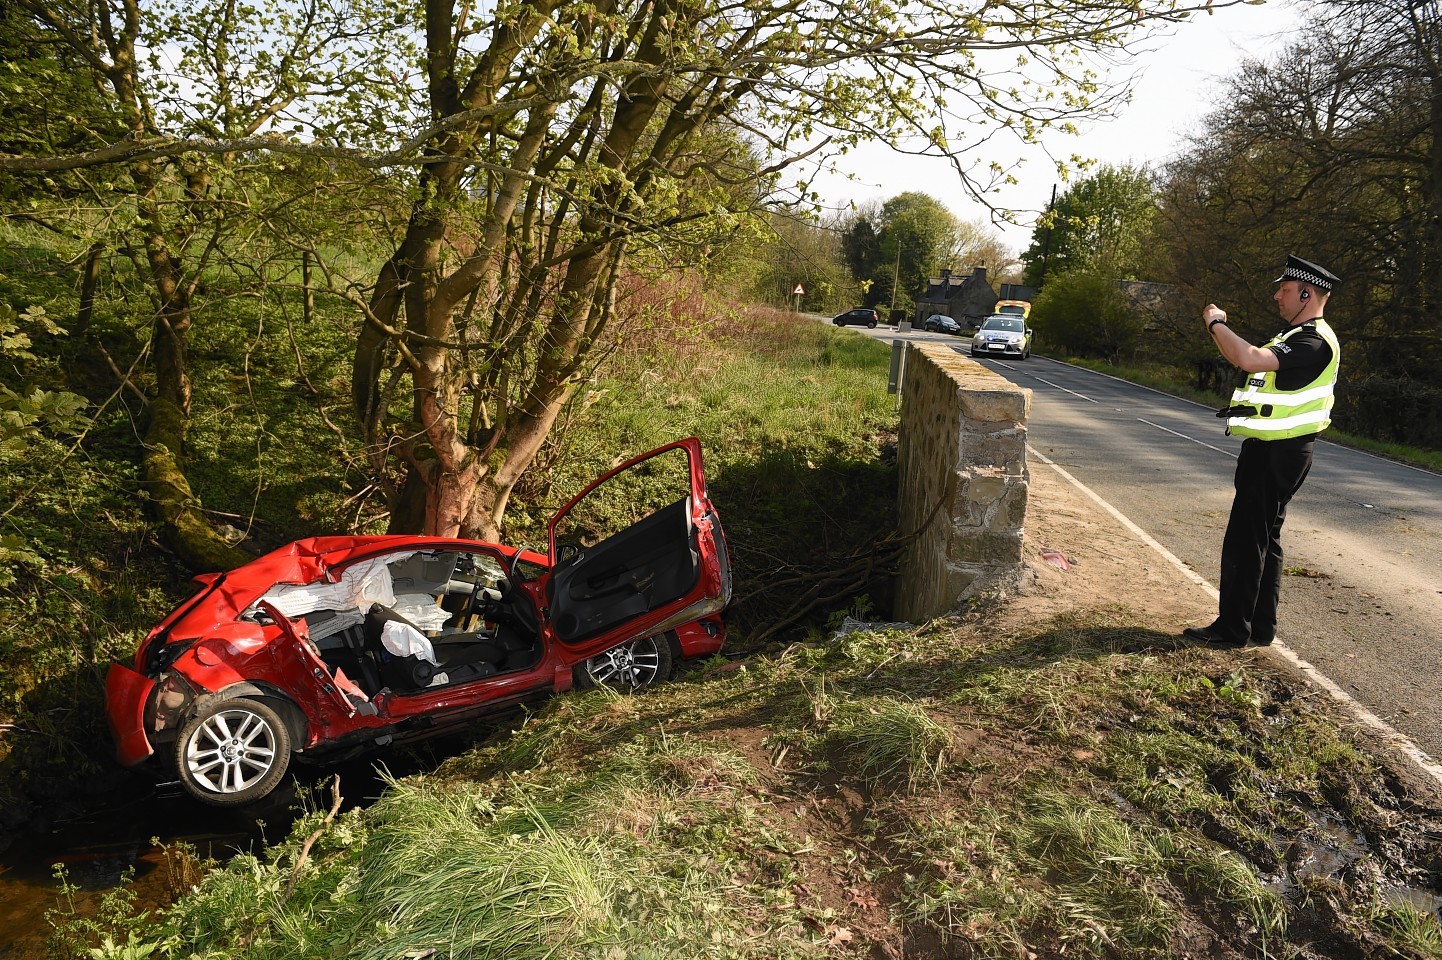 The car tumbled off the road and down an embankment 